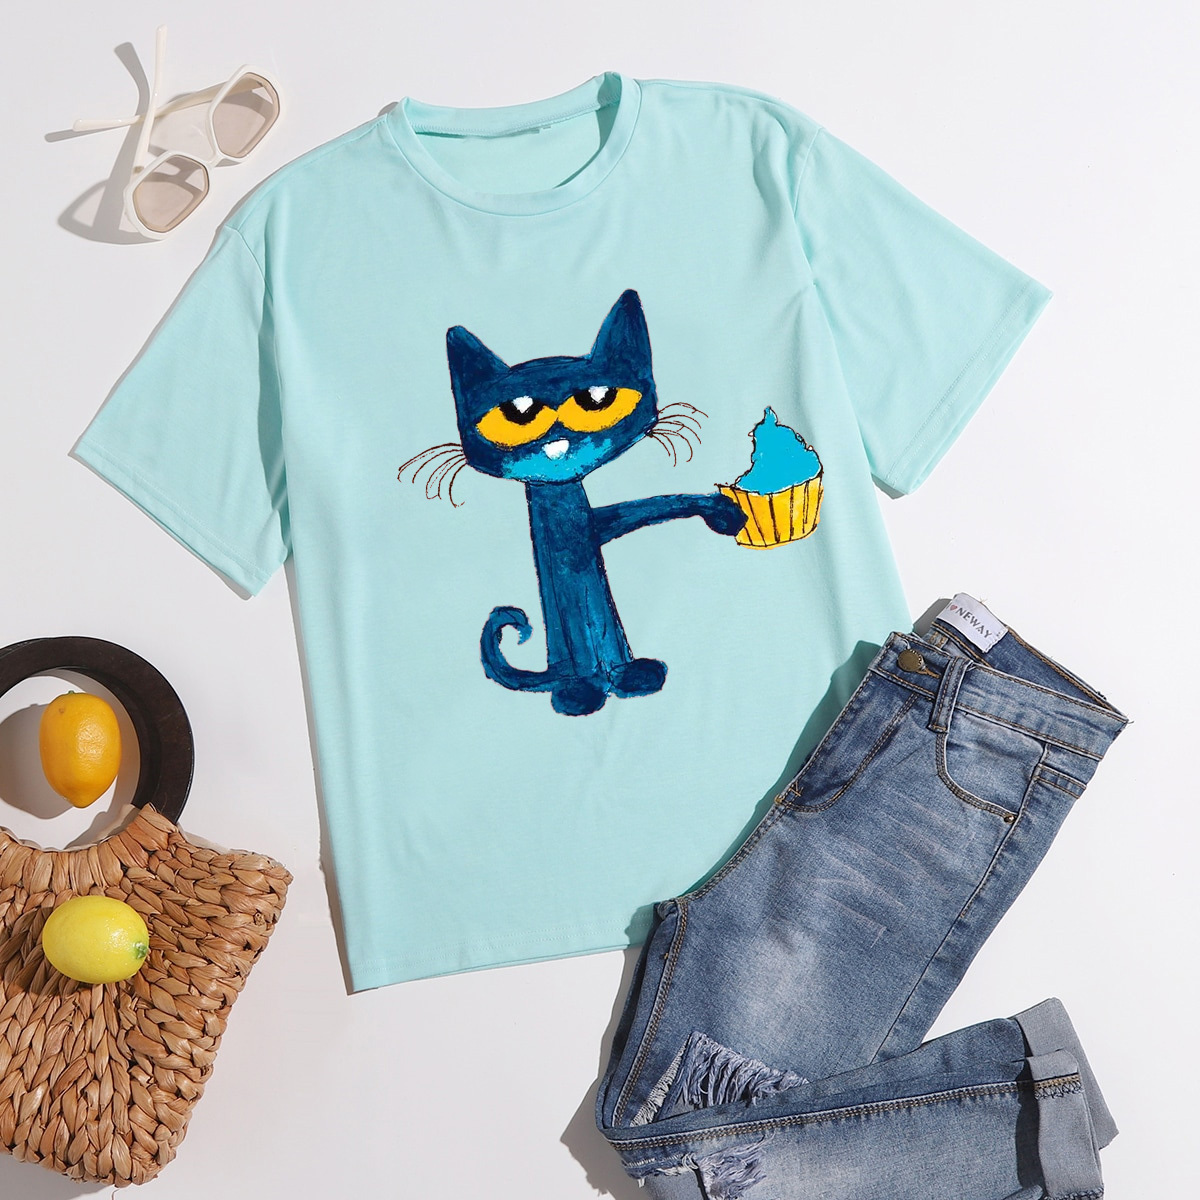 Funny Cute Pete the cat shirt, Messy Cupcake cat shirt, Its A Good Day To Teach Tiny Humans The Cat shirt, Back To School, Crayon Teacher